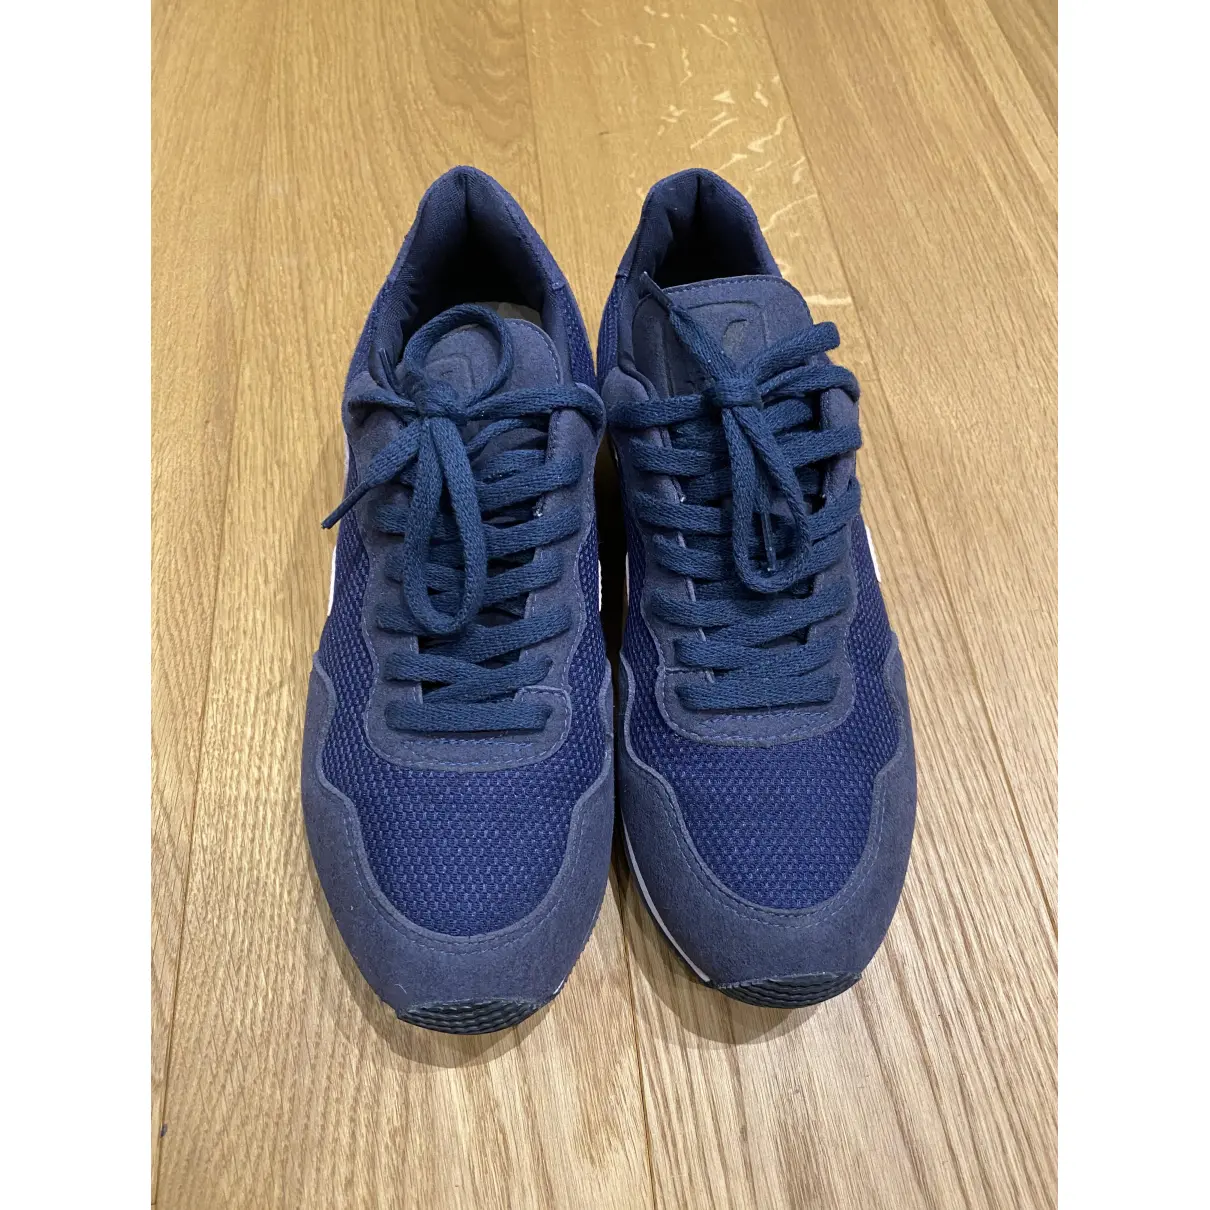 Buy Veja Cloth trainers online